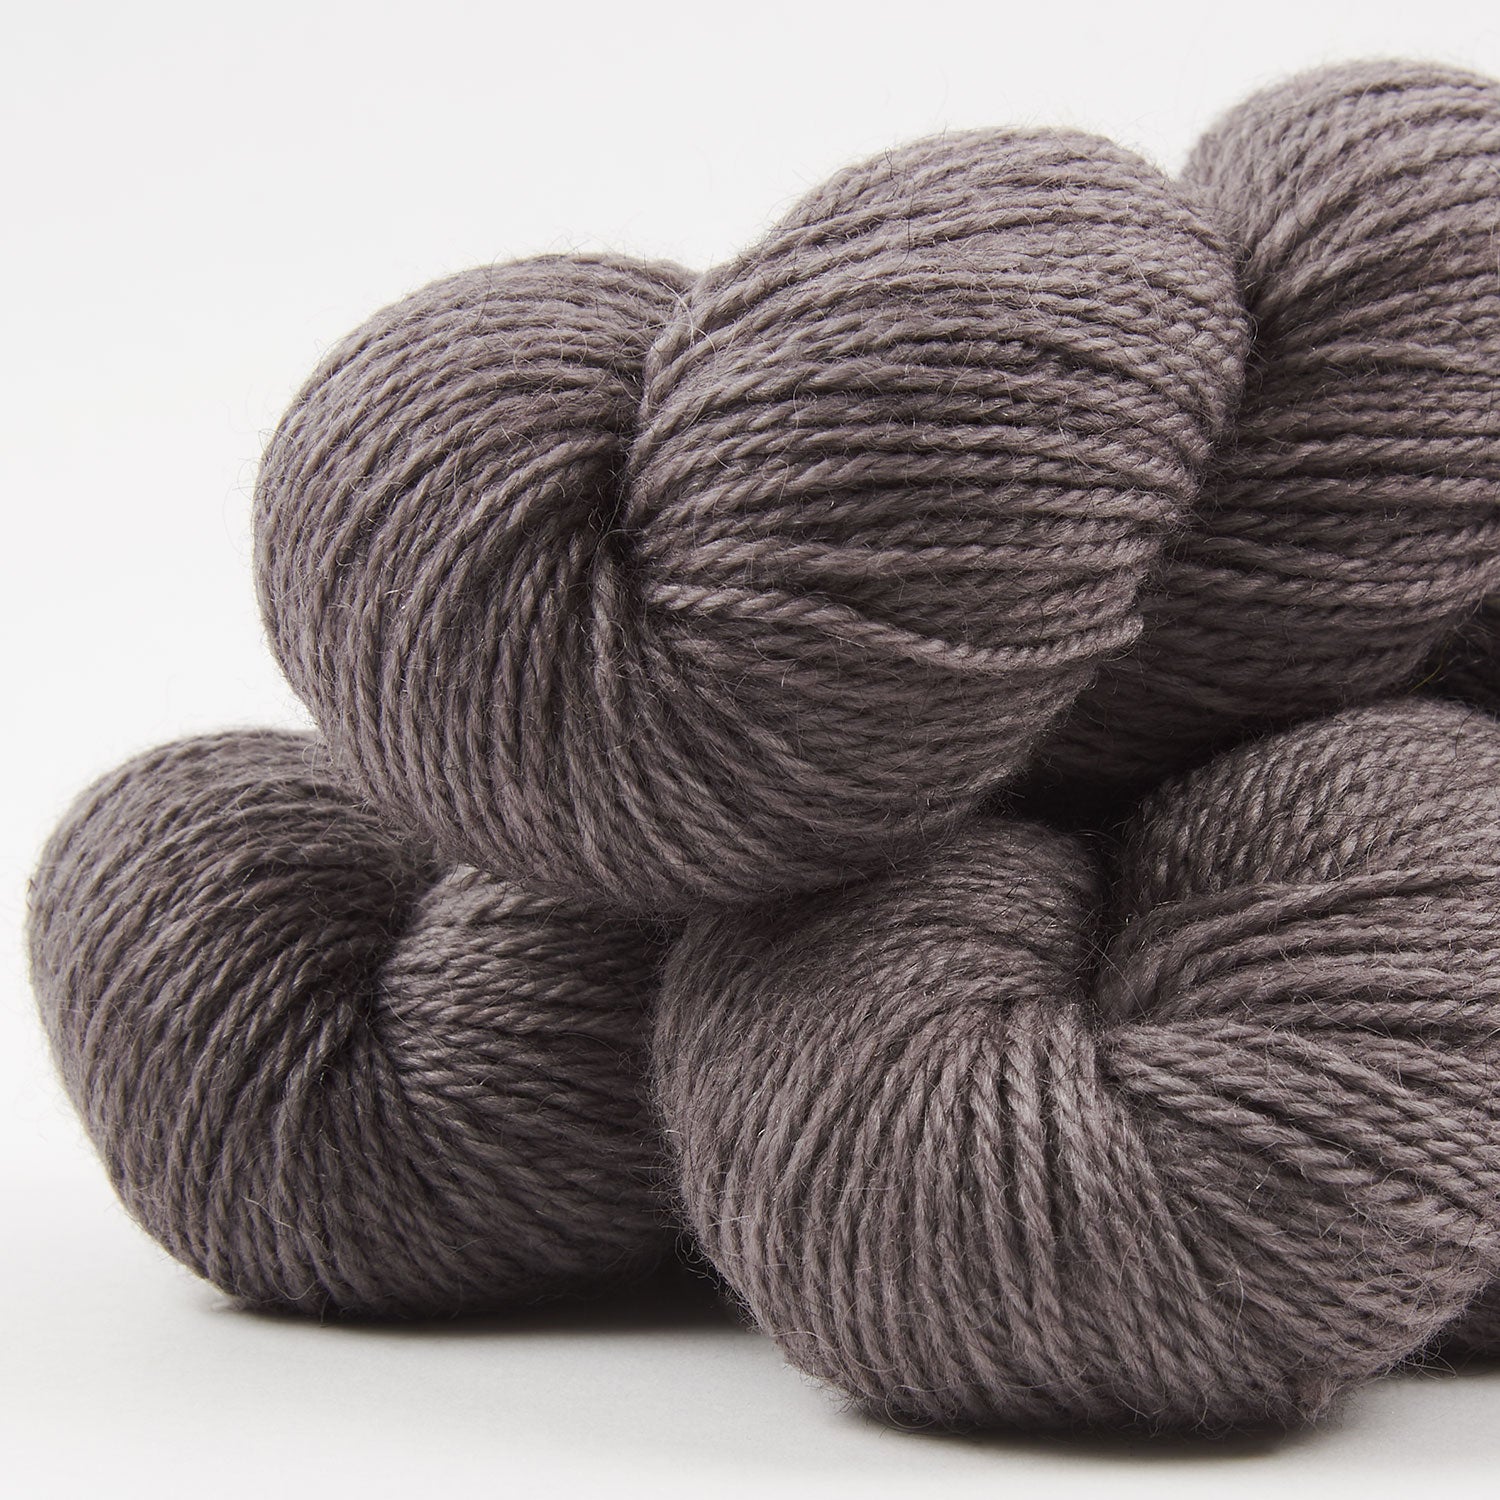 CORRIE WORSTED - STONE